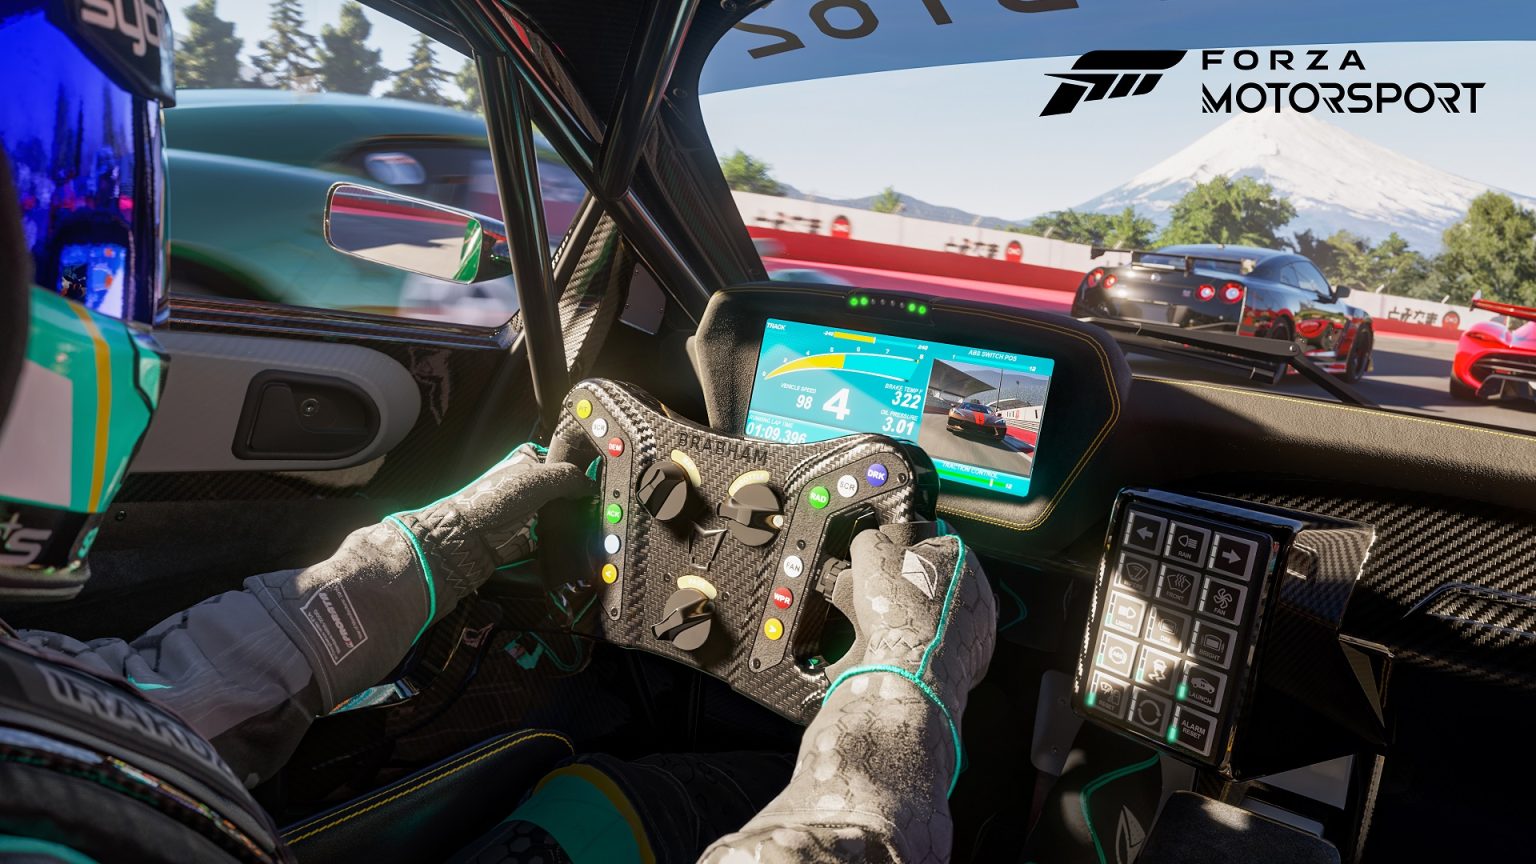 Forza Motorsport Looks Absolutely Stunning in New Screenshots